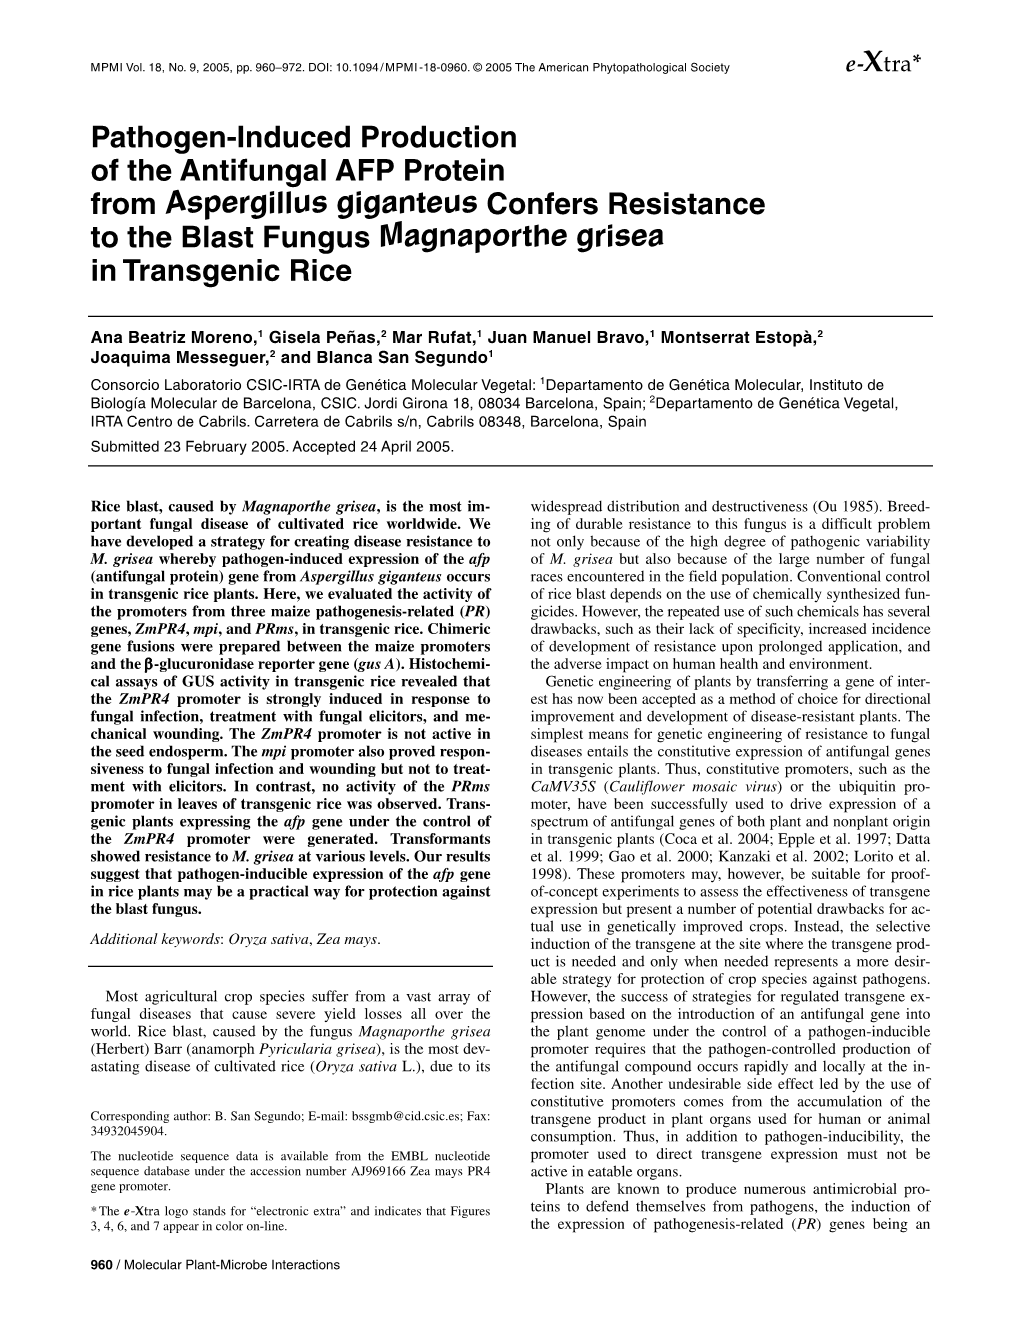 Pathogen-Induced Production of the Antifungal AFP Protein from Aspergillus Giganteus Confers Resistance to the Blast Fungus Magnaporthe Grisea in Transgenic Rice